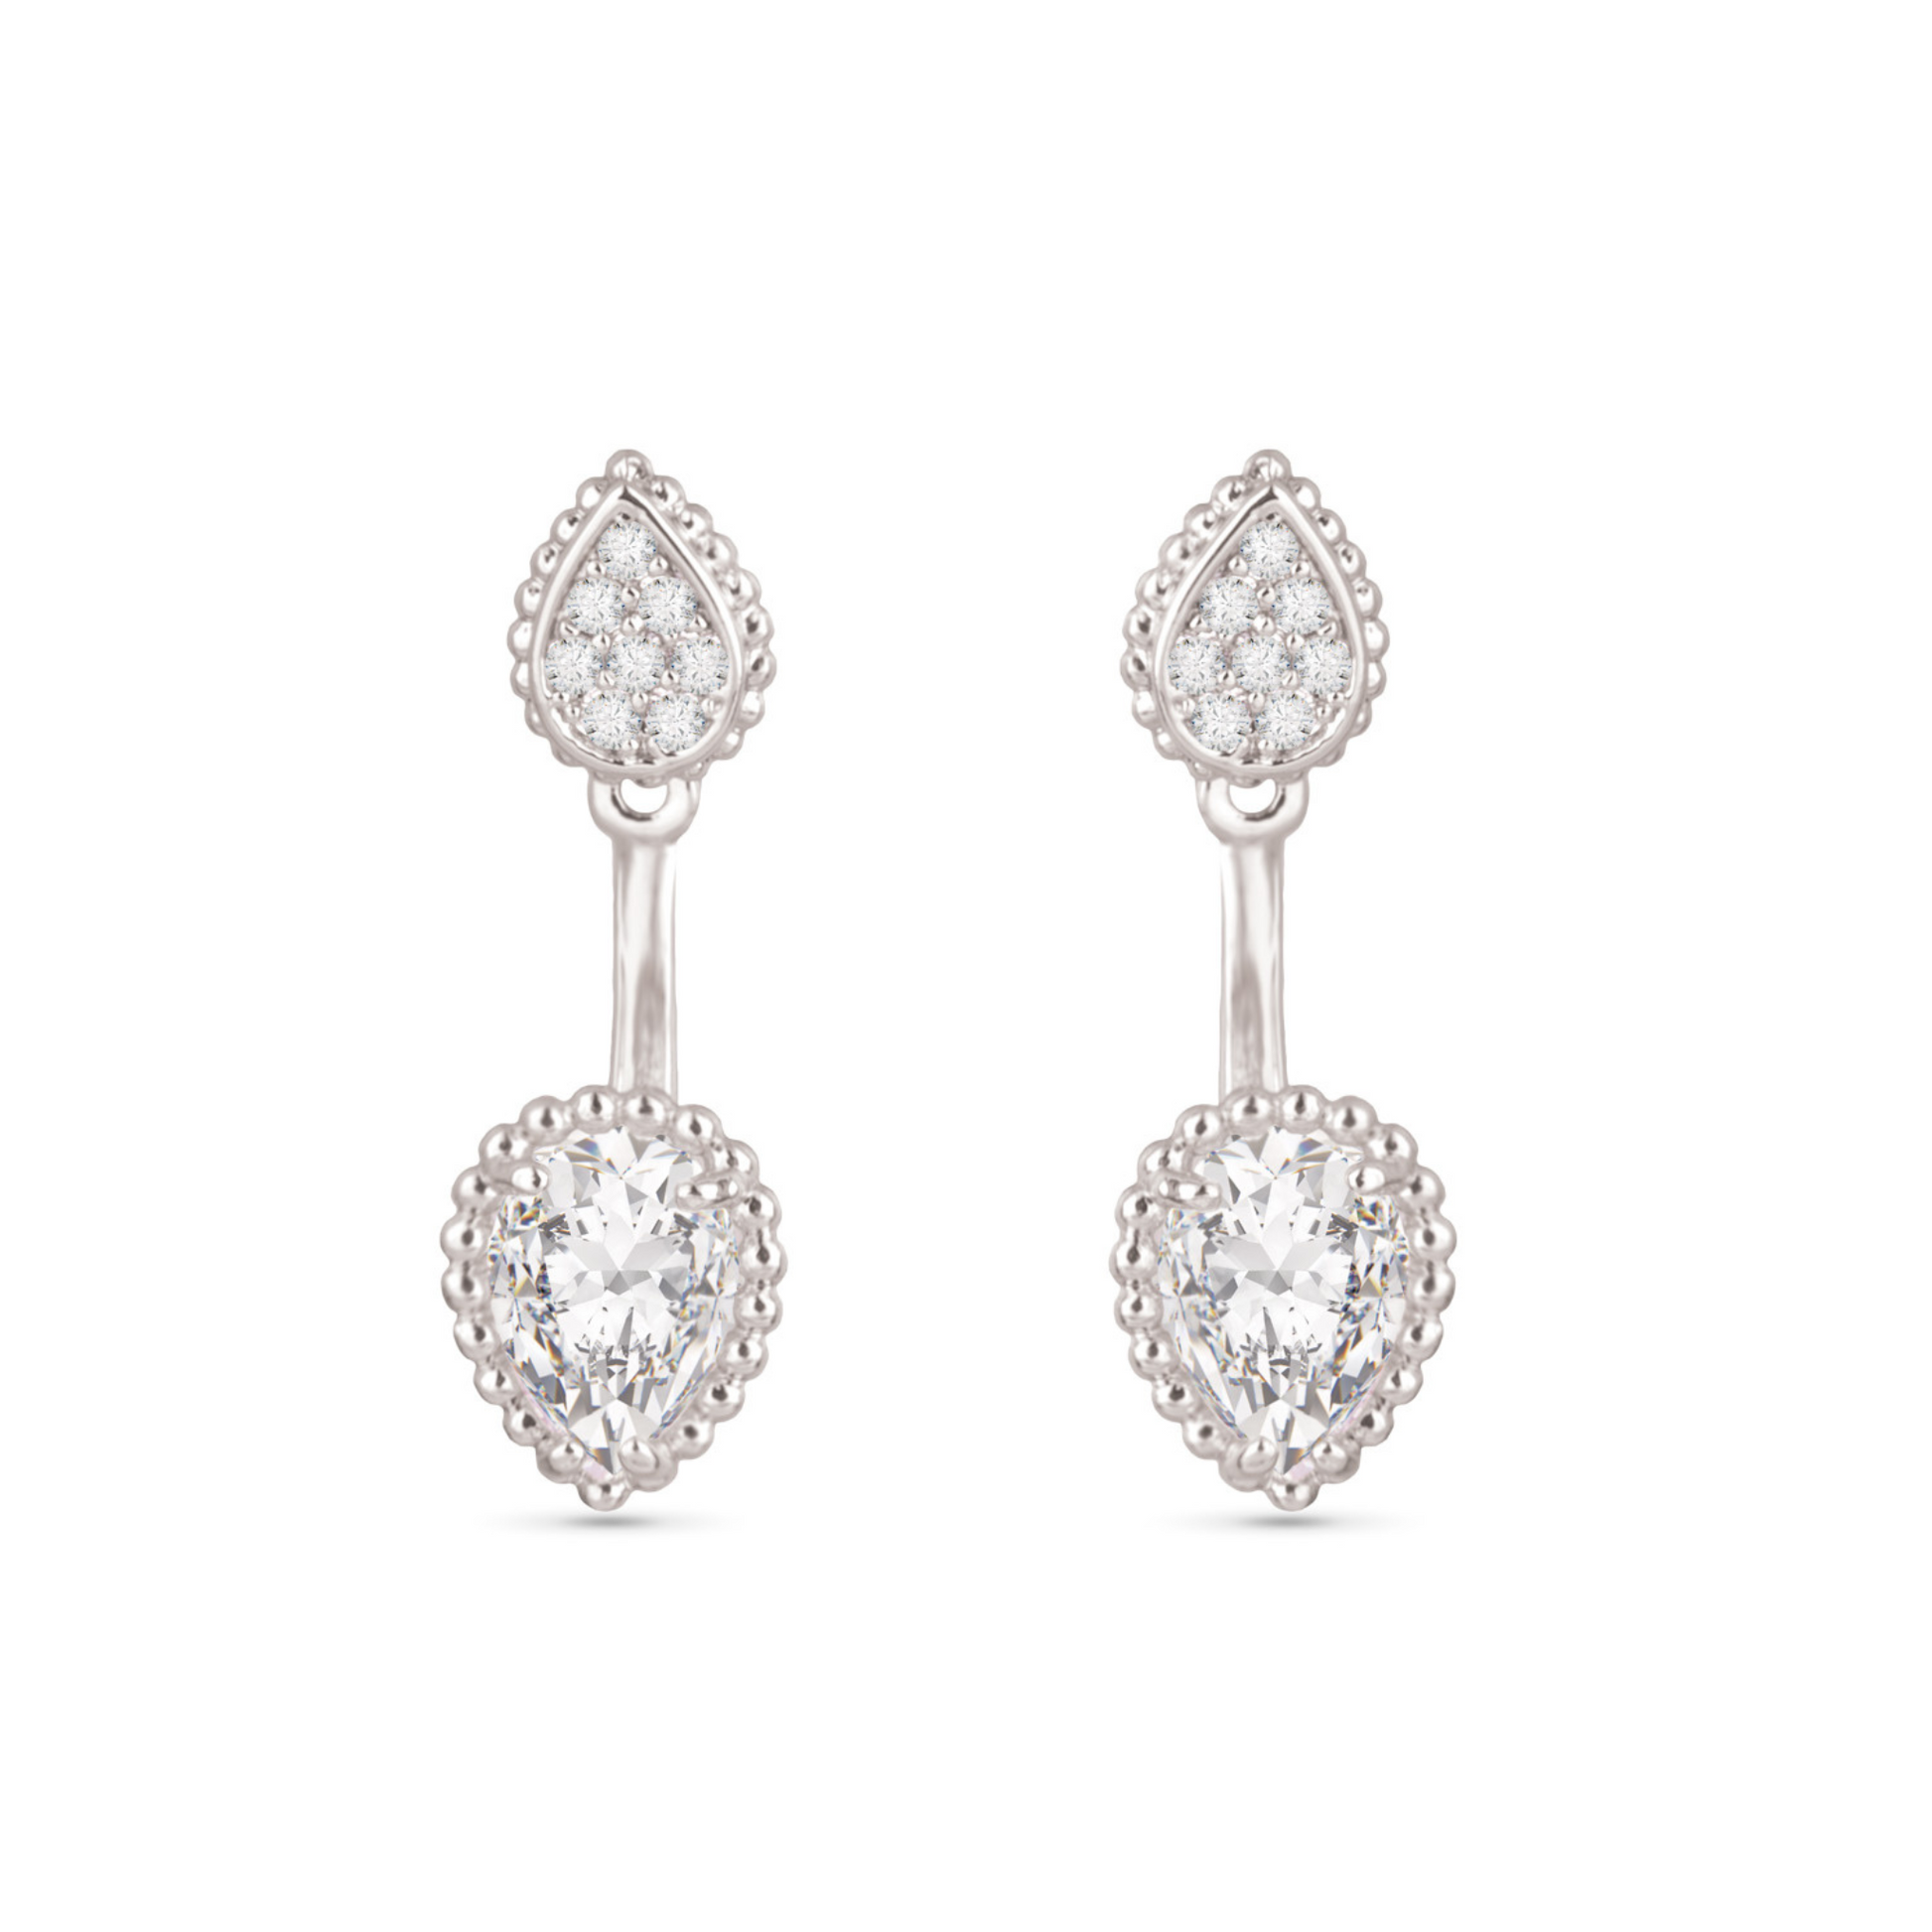 Elevate your style with these Pear Stud Dangle Earrings. Made with high-quality silver, these elegant dangle earrings feature stunning rhinestone accents, adding a touch of sparkle to any outfit. Perfect for any occasion, these earrings are a must-have for any fashion-forward individual.